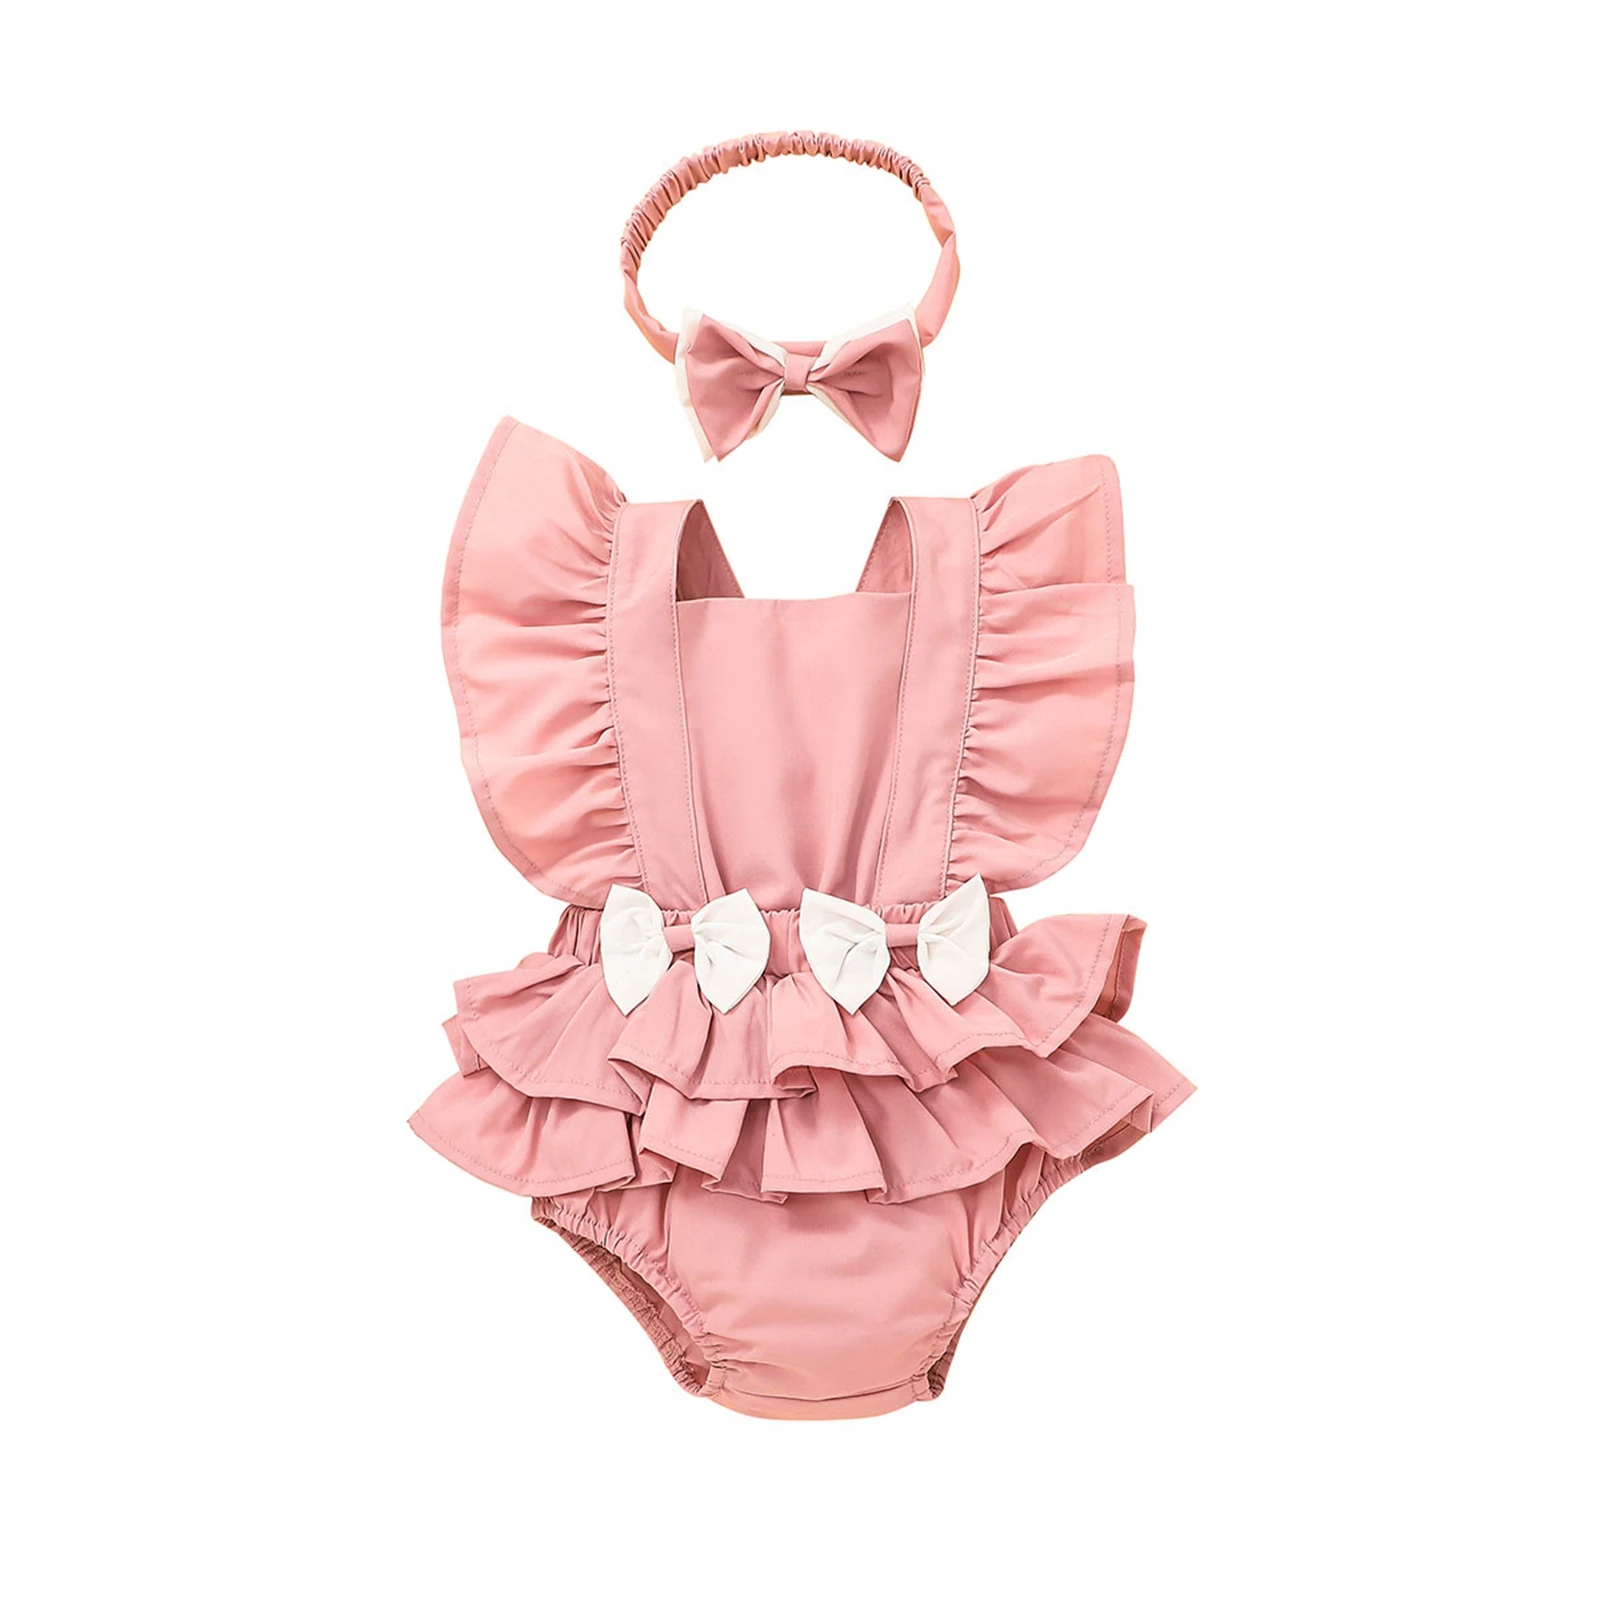 cool baby bodysuits	 Ma&Baby 0-18M Newborn Infant Baby Girl Romper Bow Ruffle Jumpsuit Overalls Cute Toddler Girl Summer Clothing Costumes D01 bulk baby bodysuits	